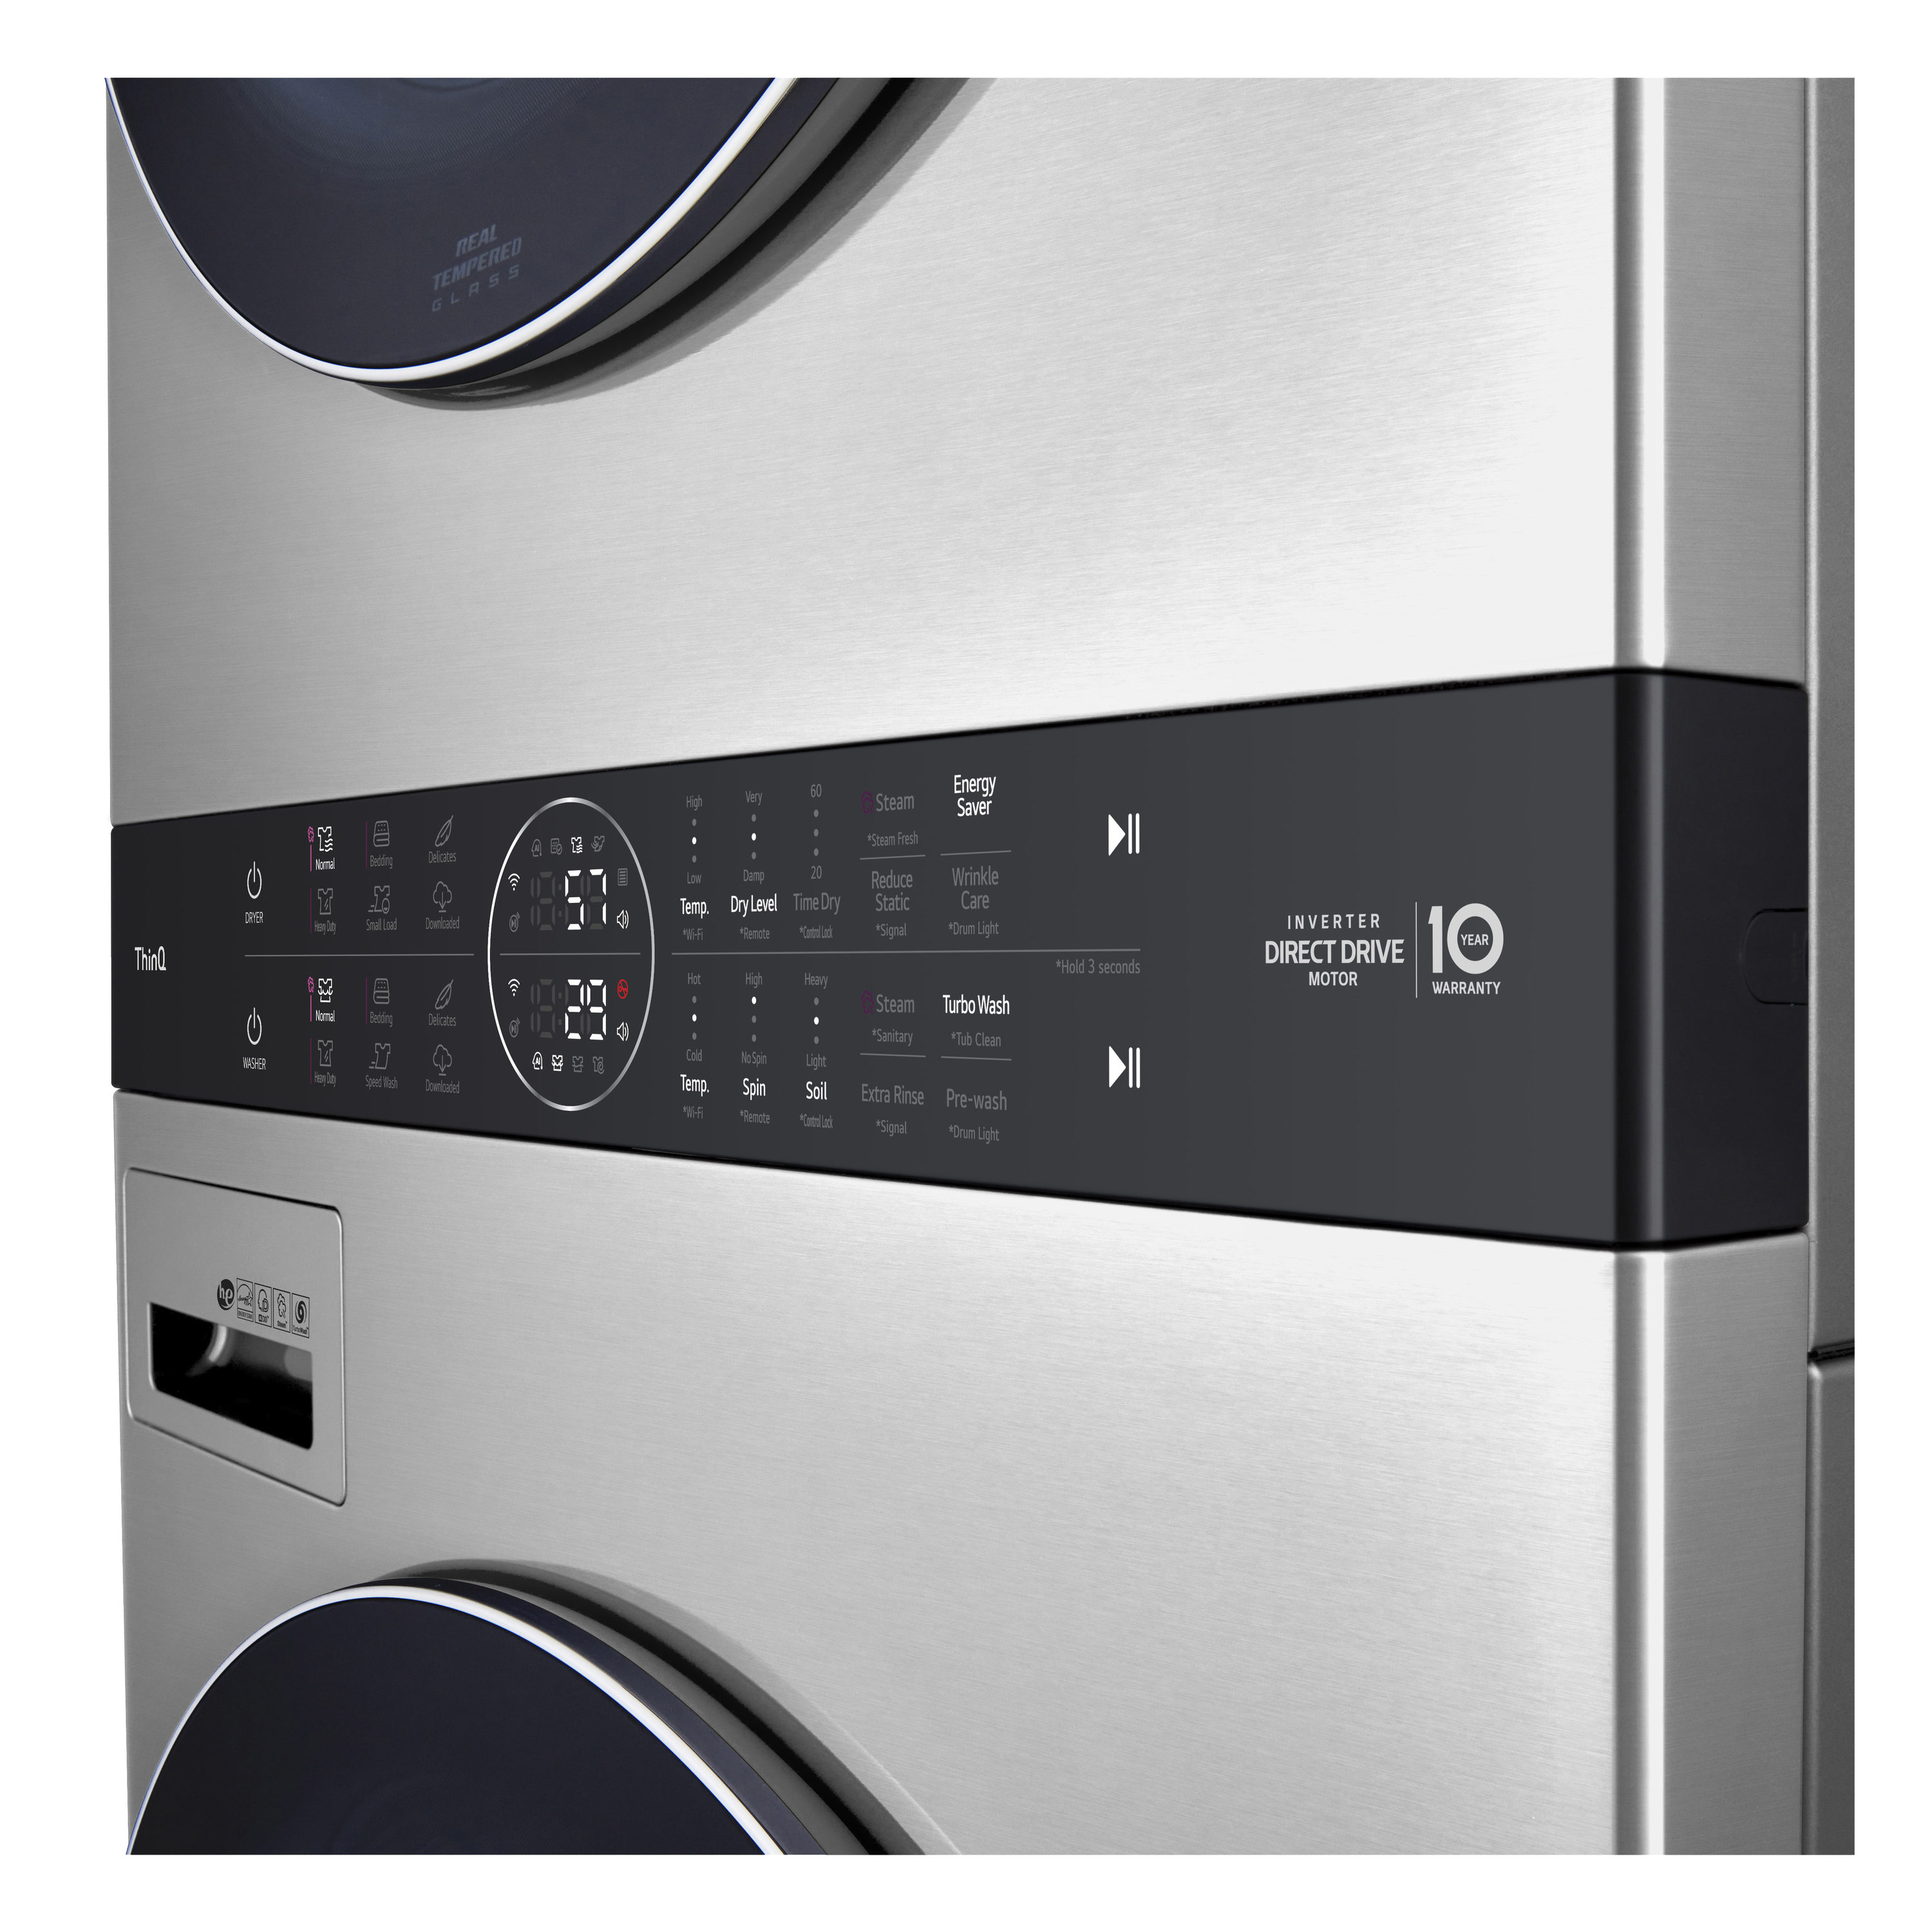 LG STUDIO Wash Laundry the Gas Dryer Stacked ft 5-cu and (ENERGY Stacked ft Laundry at Centers STAR) with Tower department Washer Center 7.4-cu in